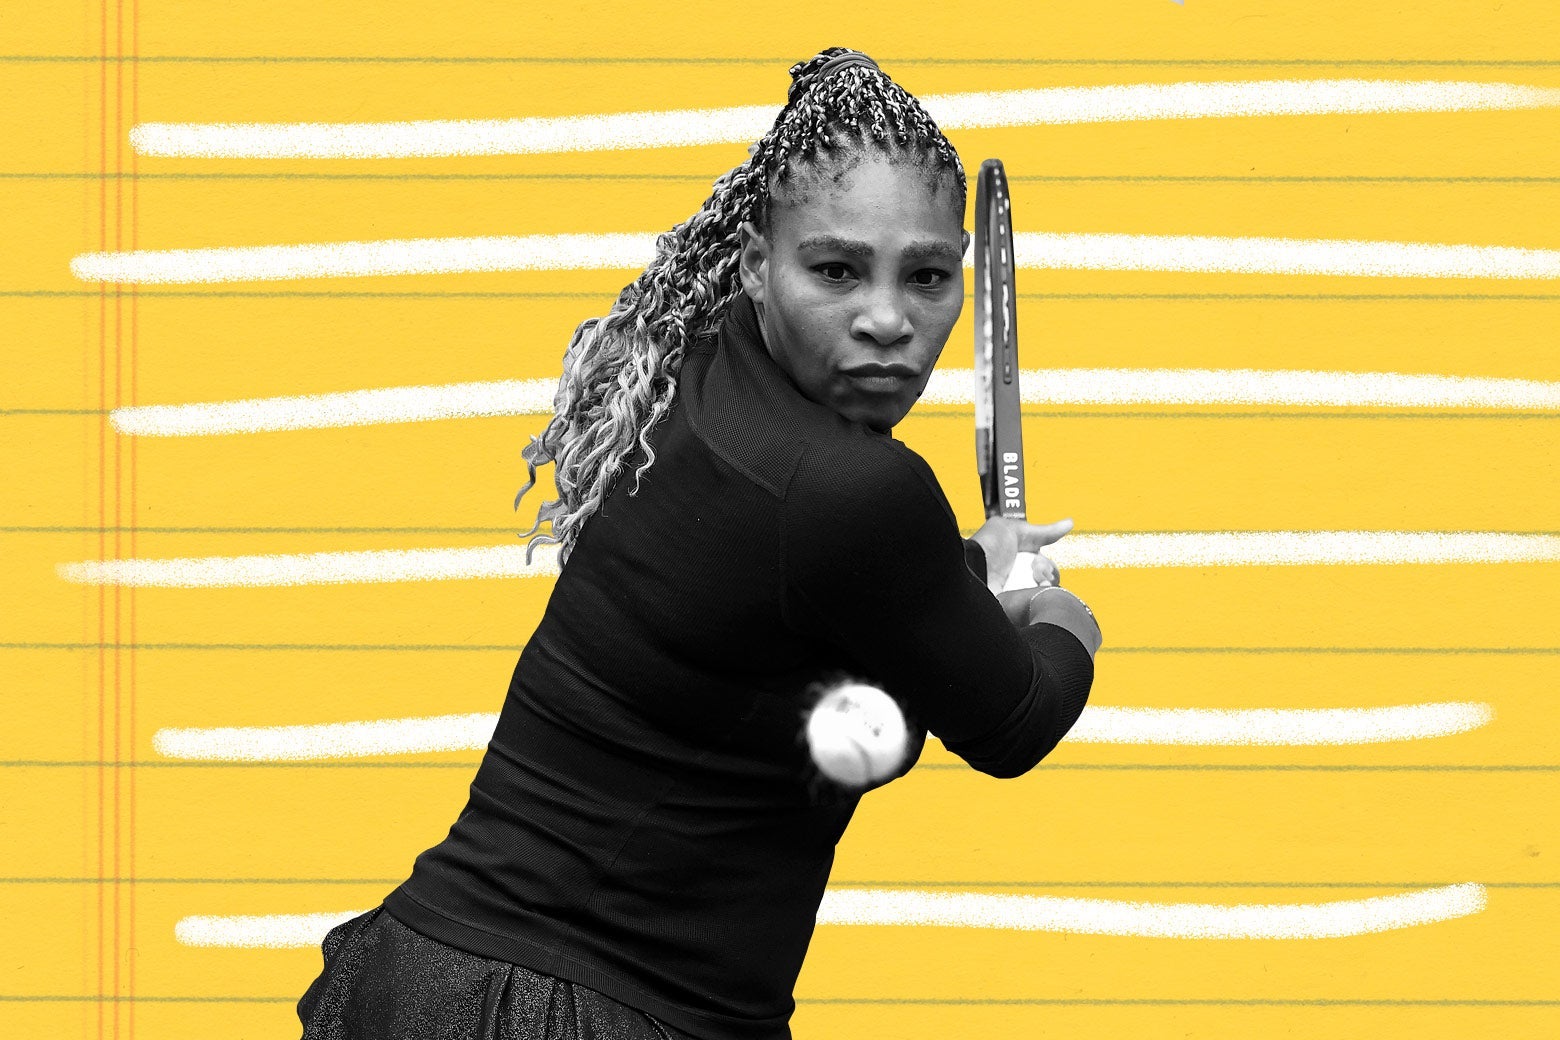 Serena Williams about to hit a tennis ball.